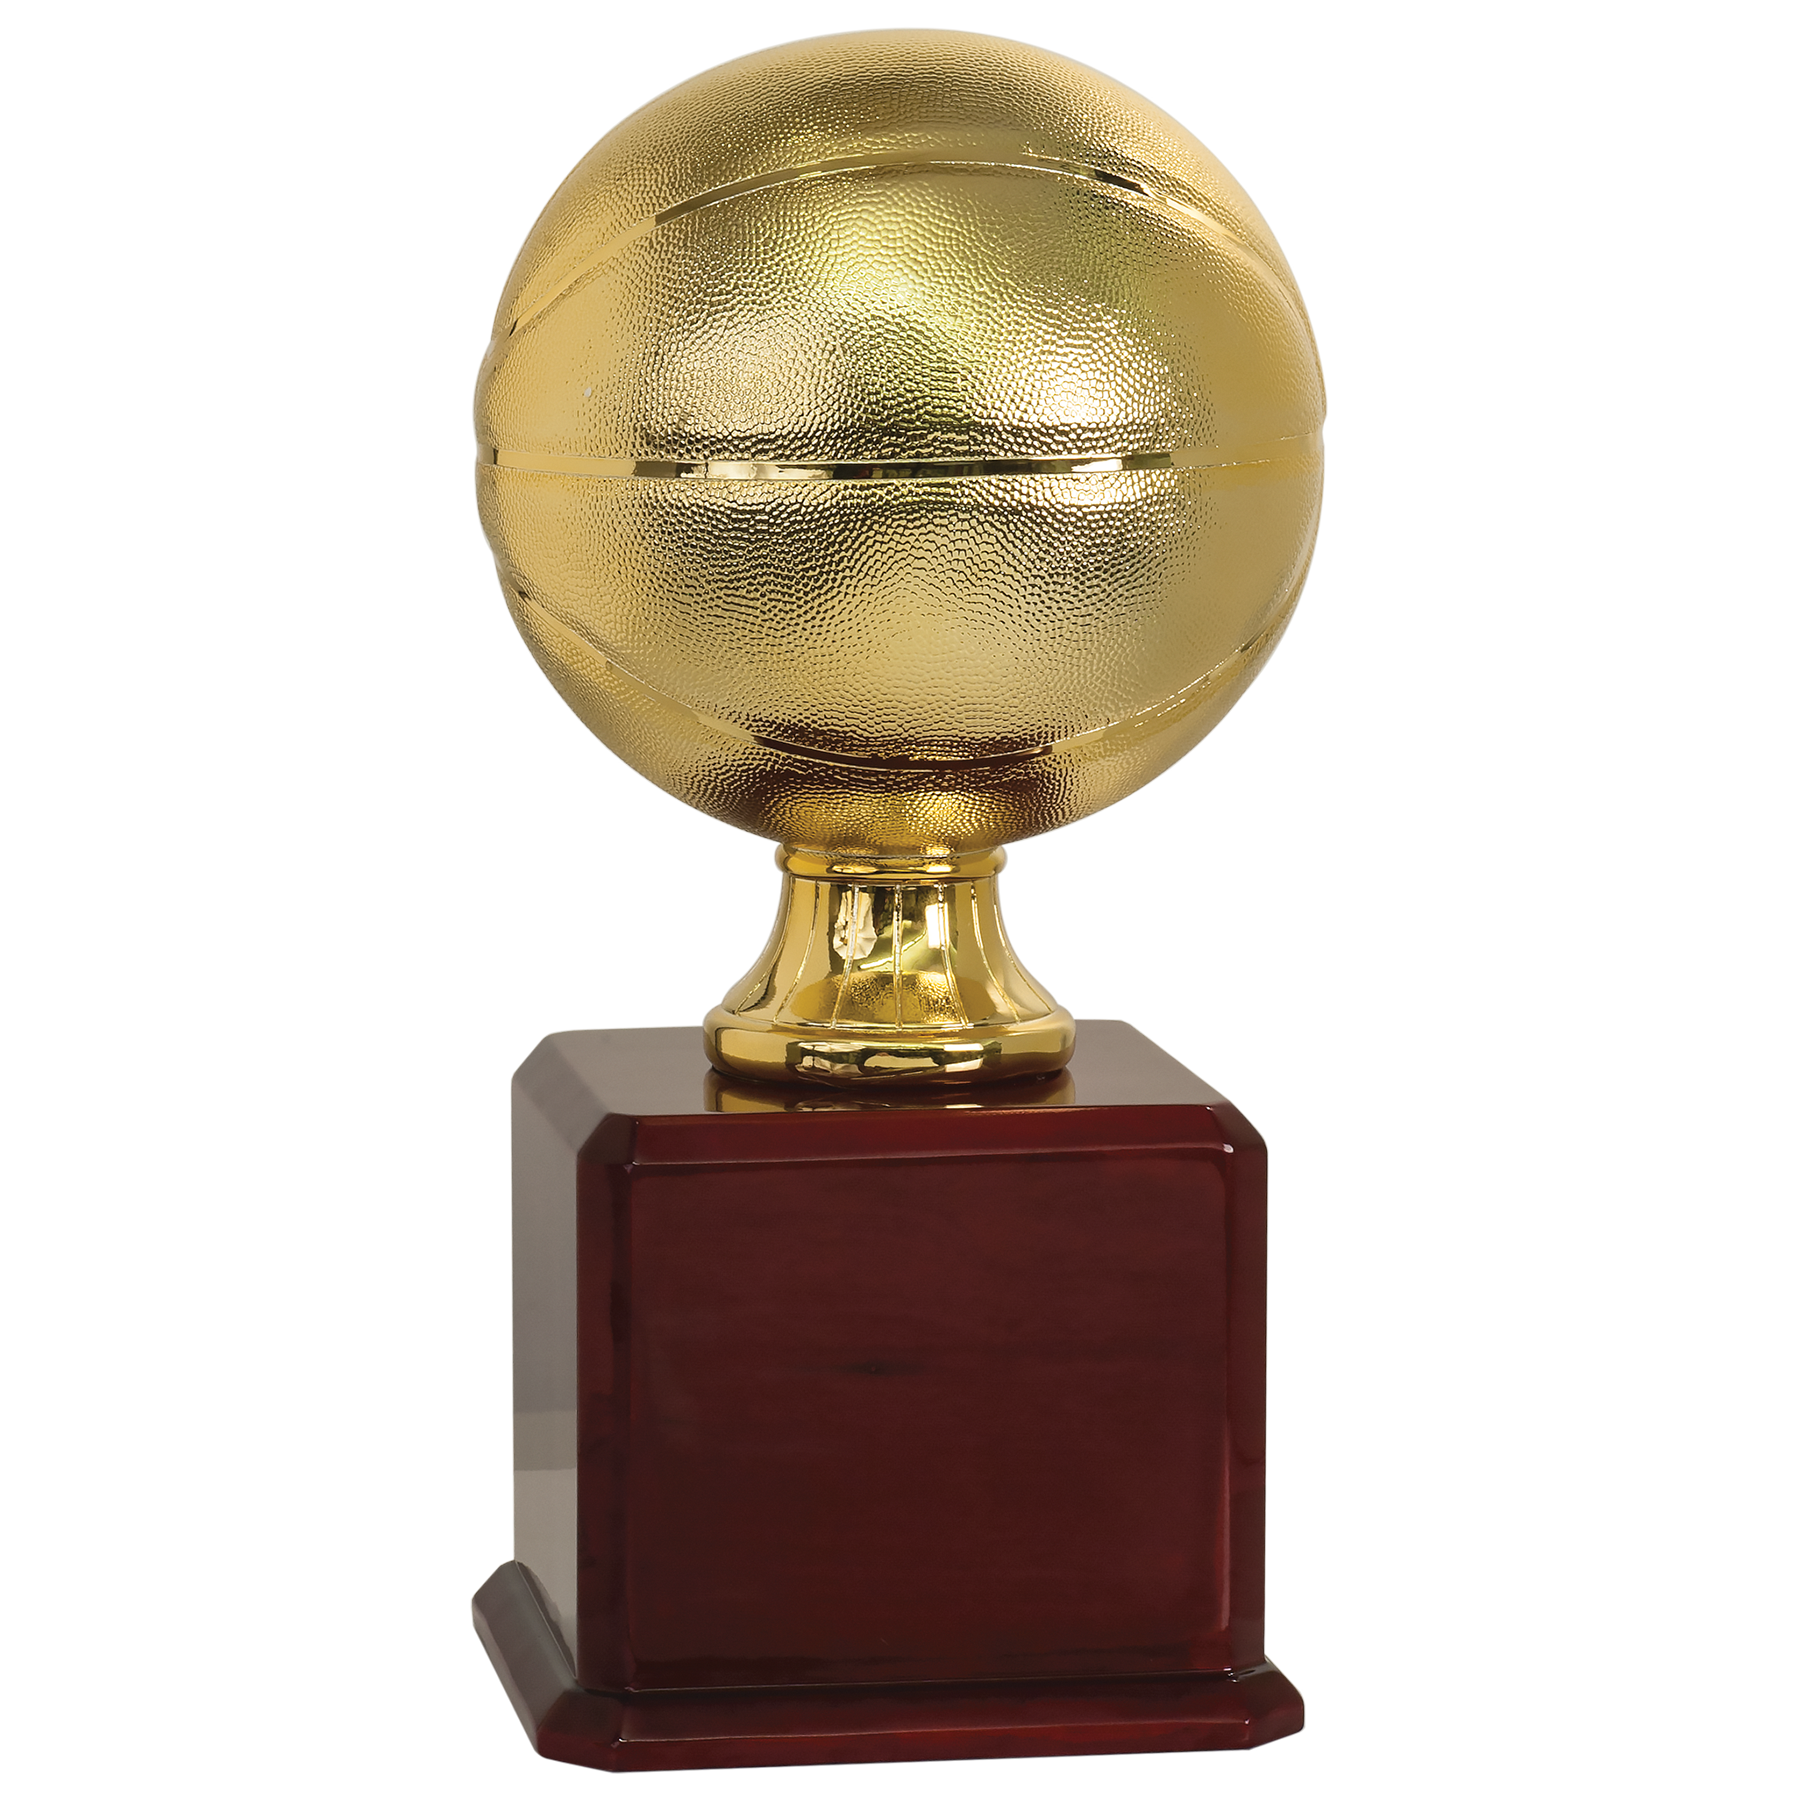 Nba Trophy Png Png Image Collection